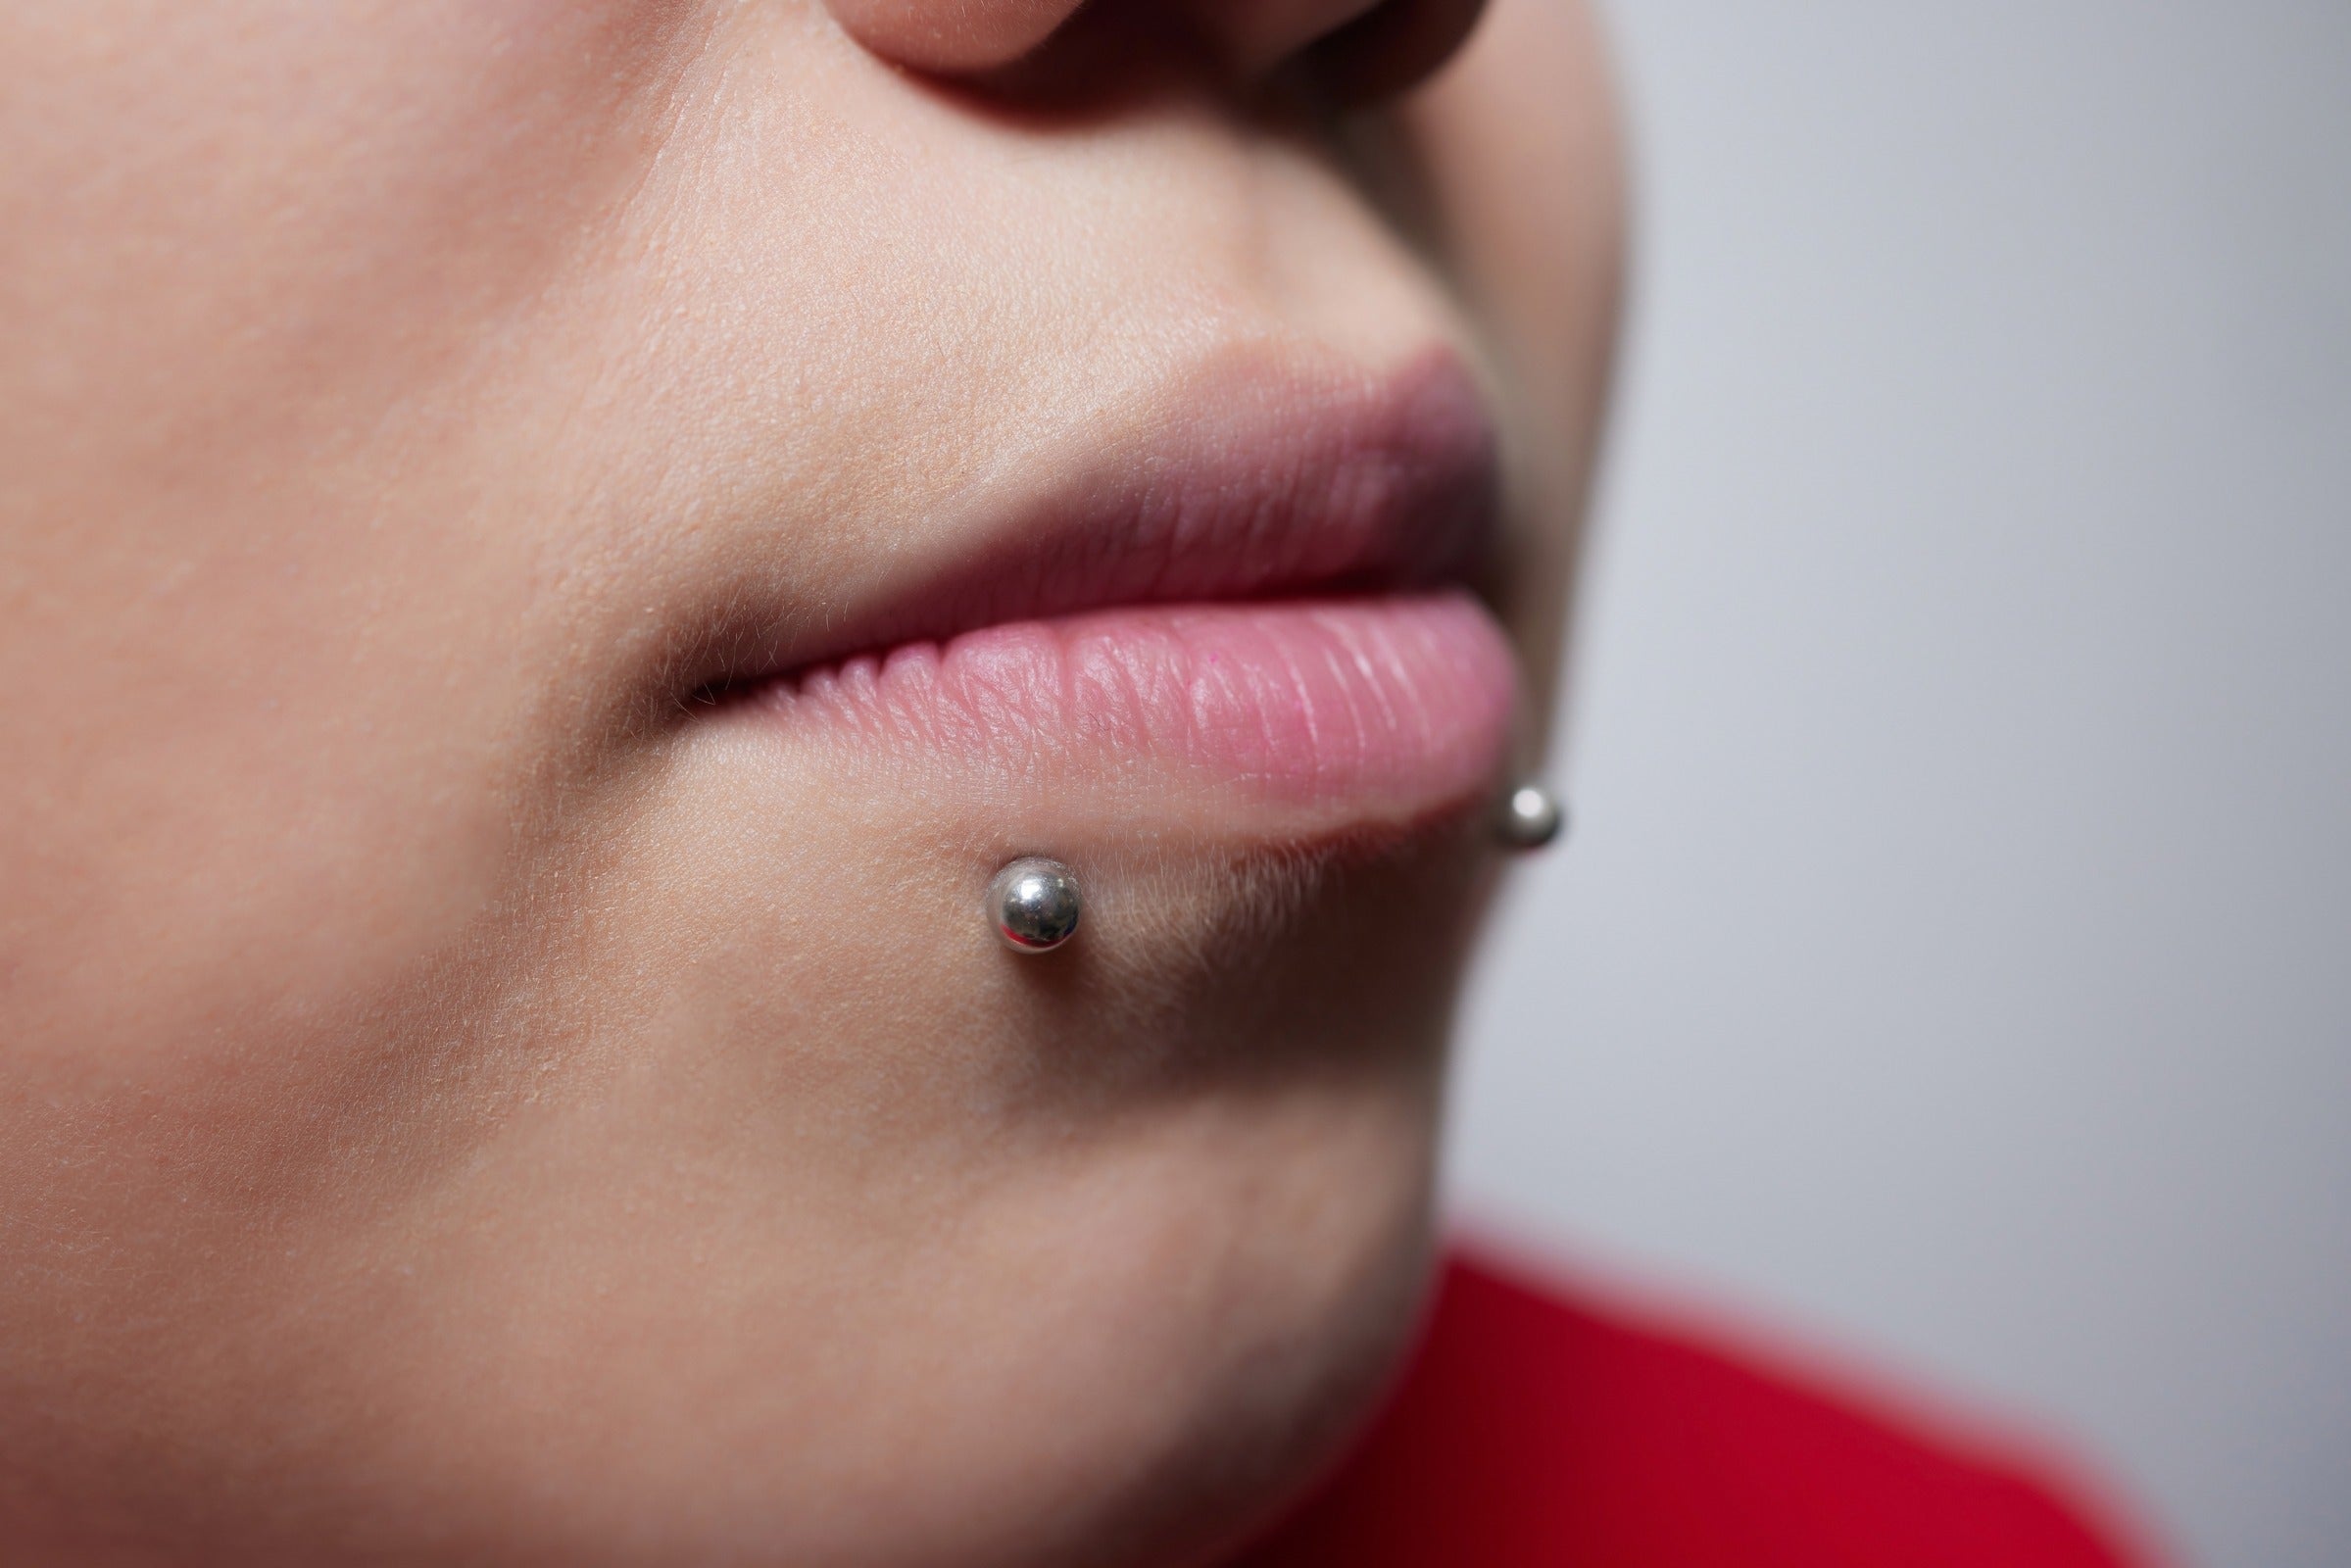 Common Challenges in Unscrewing Lip Piercing Balls